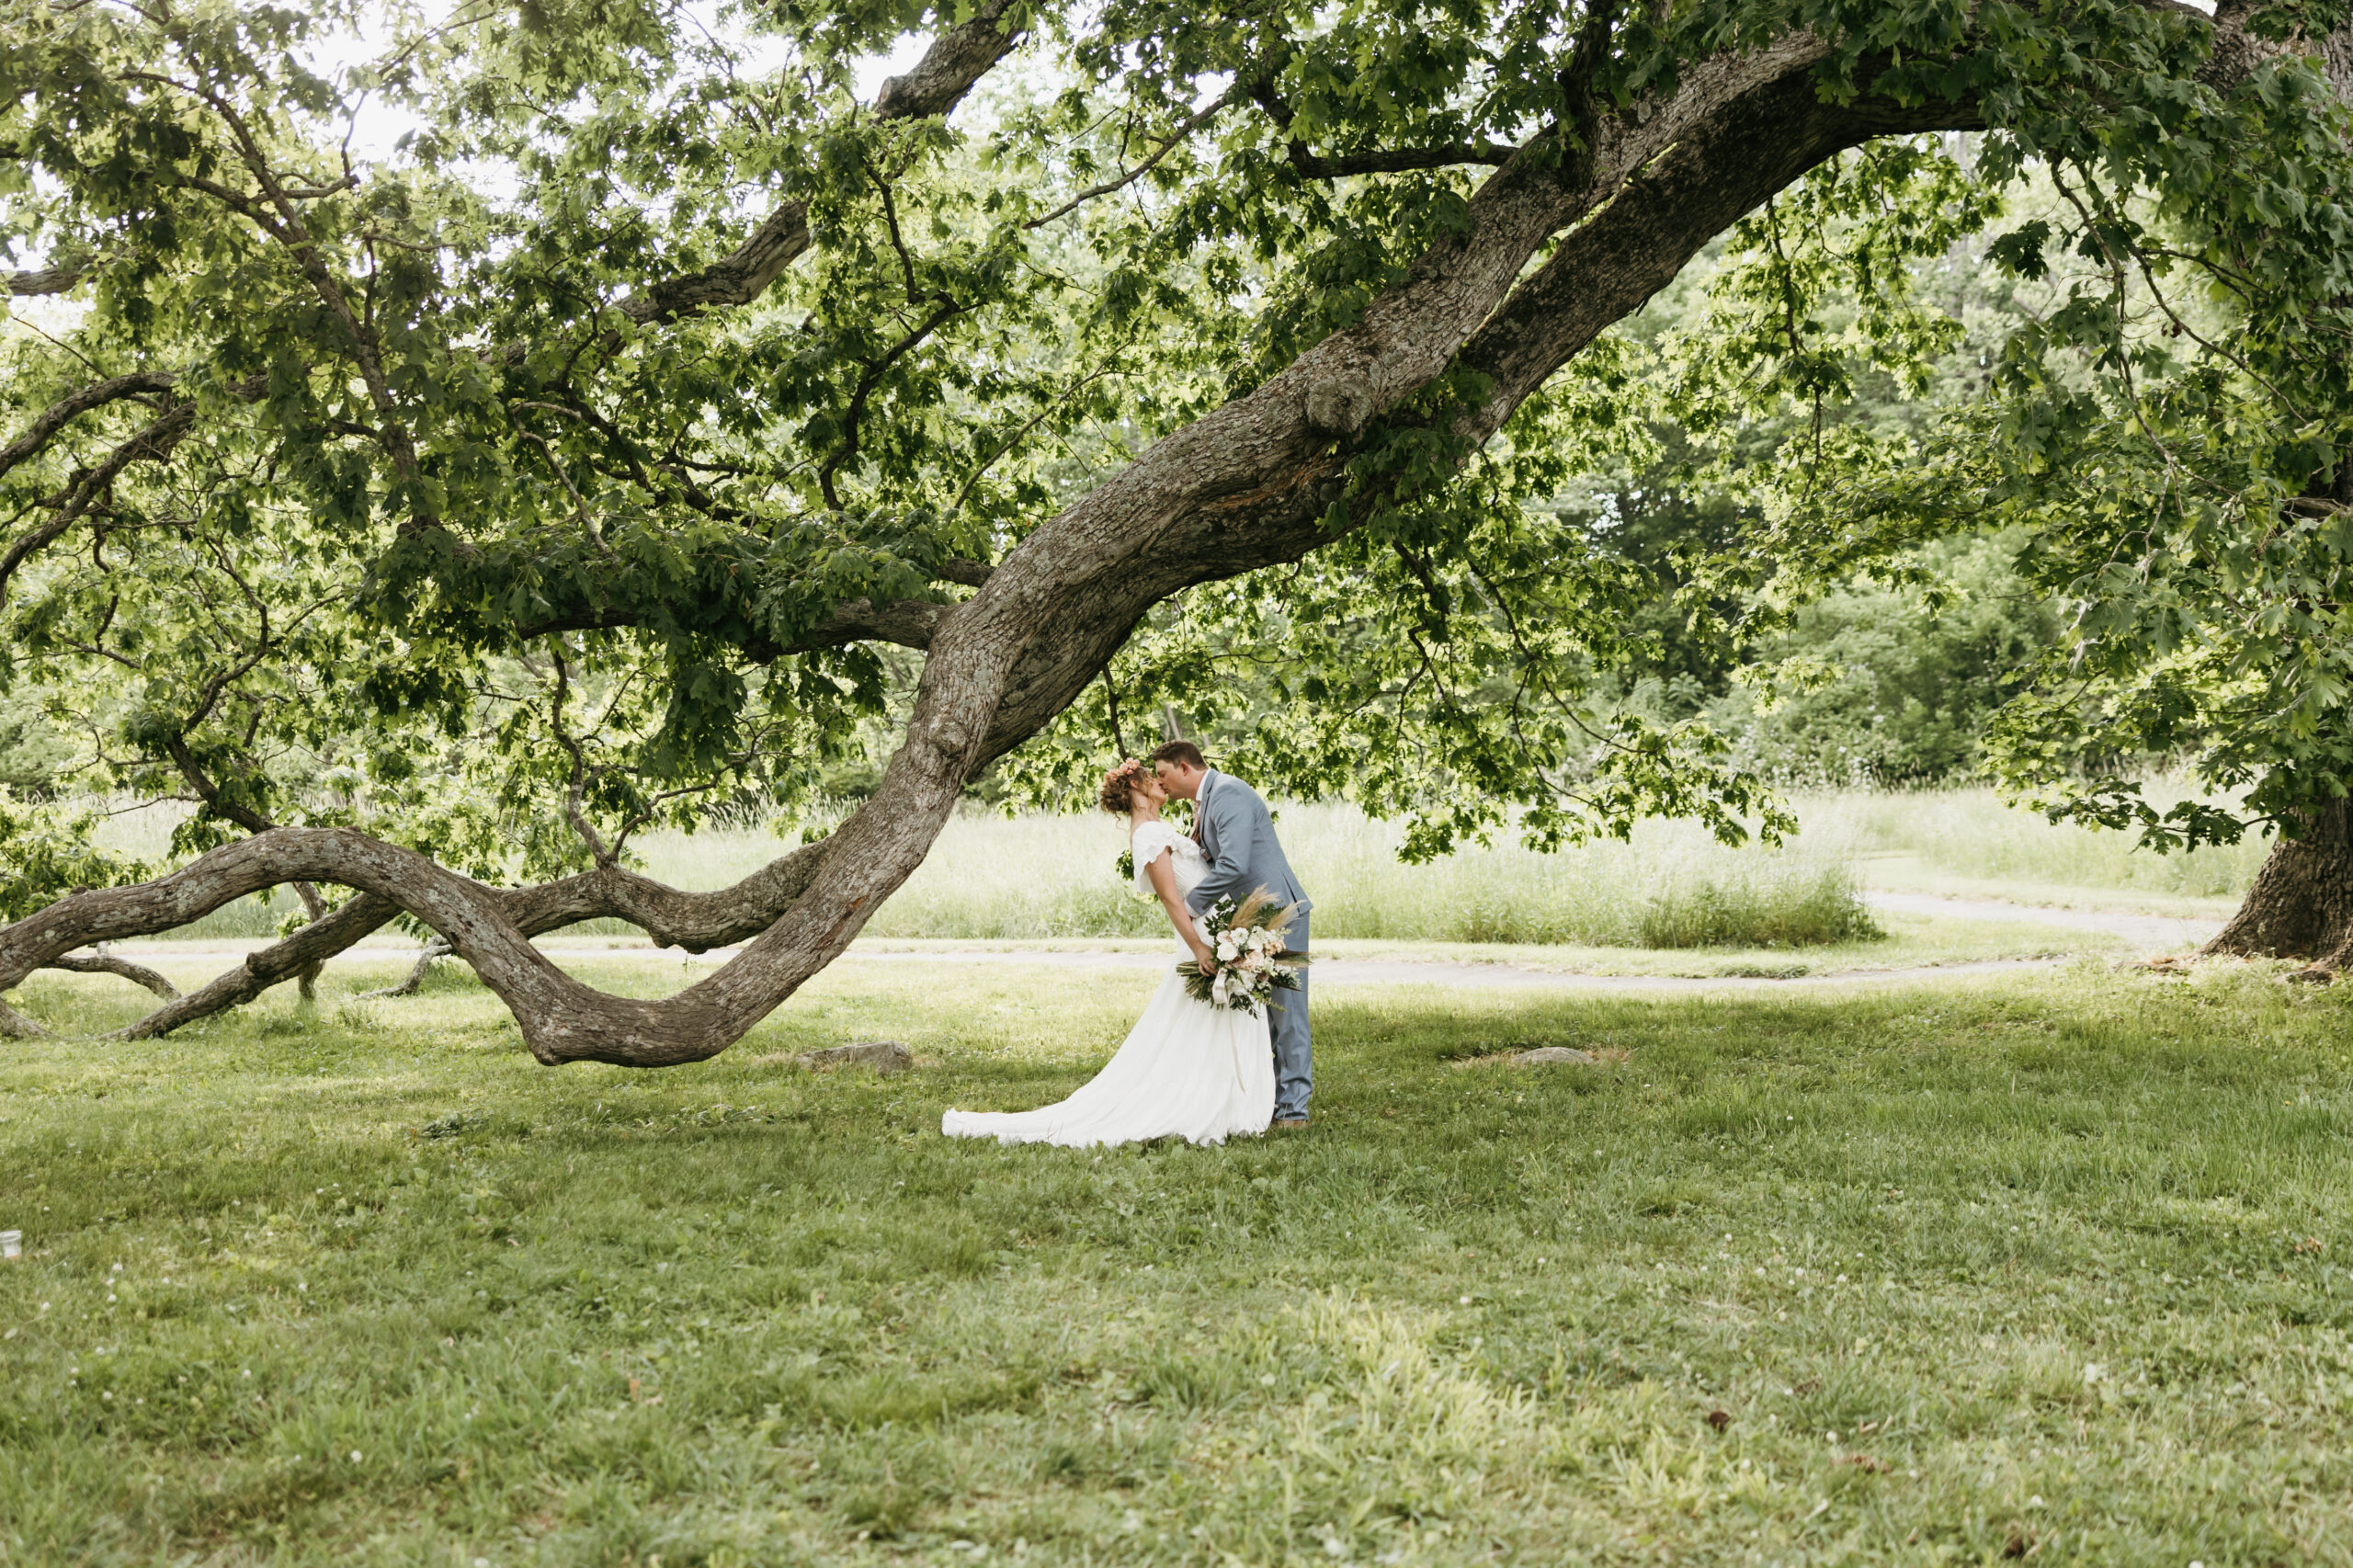 beautiful outdoor wedding in Chester county PA